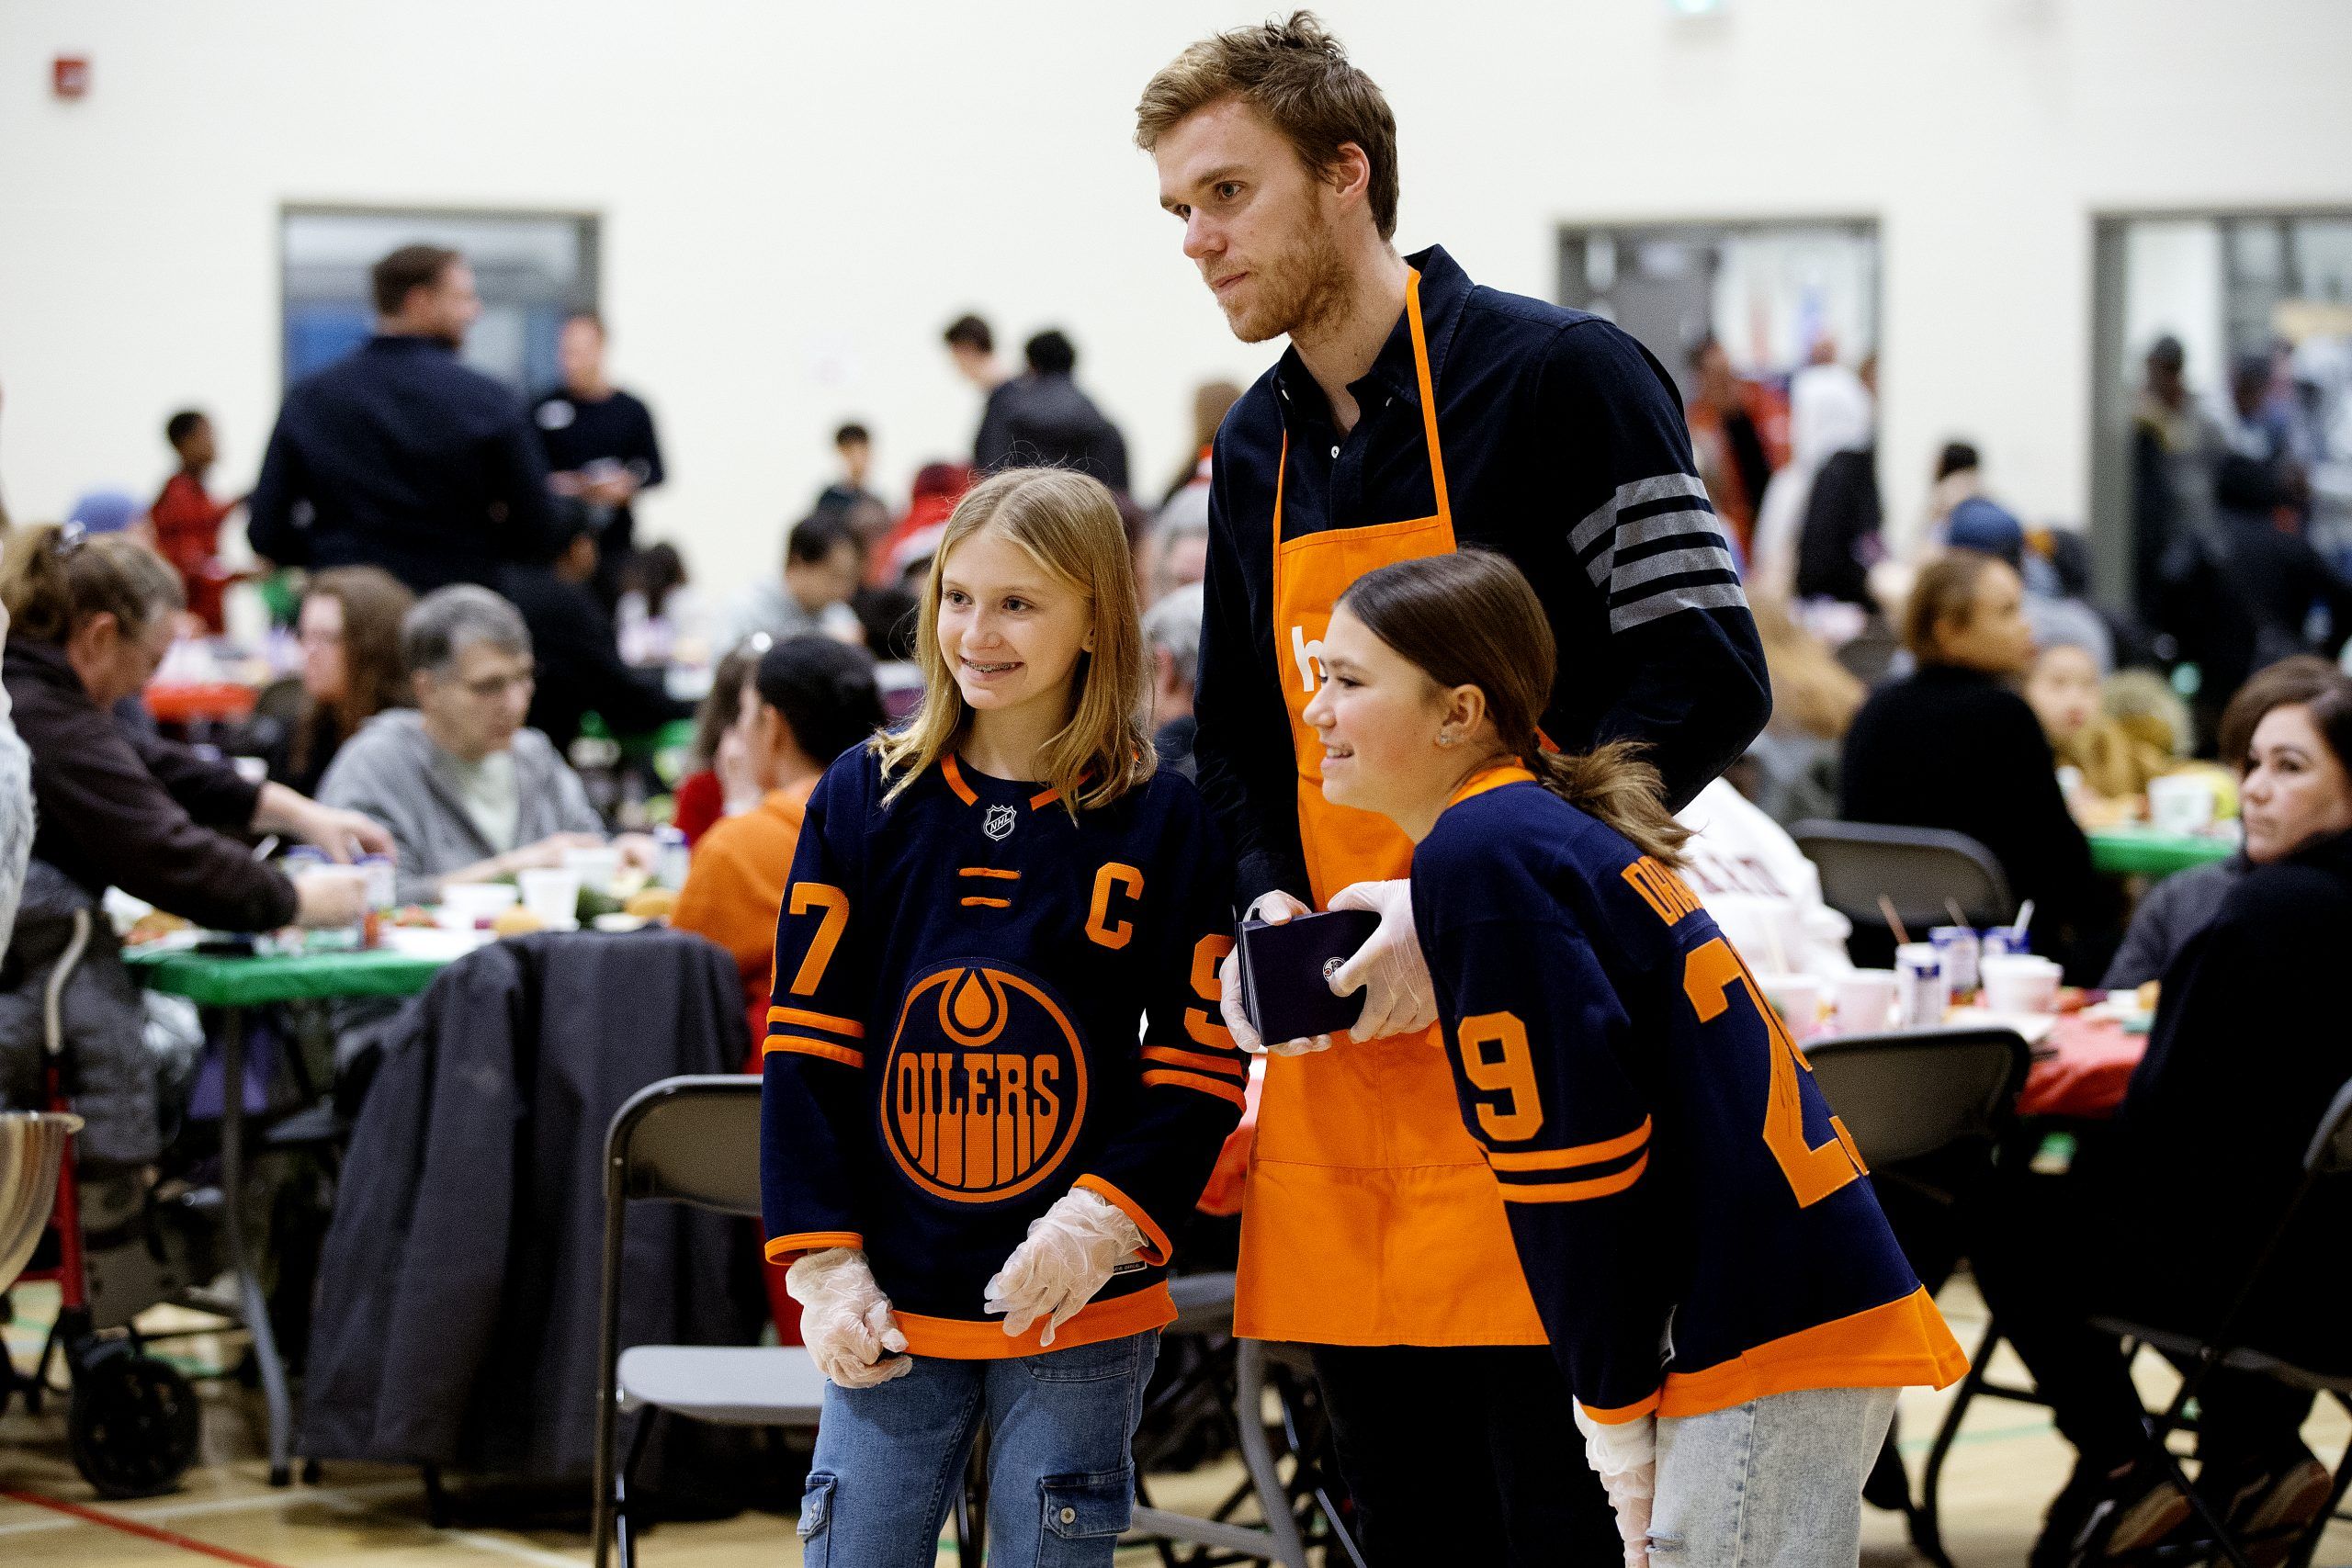 The Edmonton Oilers Community Foundation and Stollery Children's